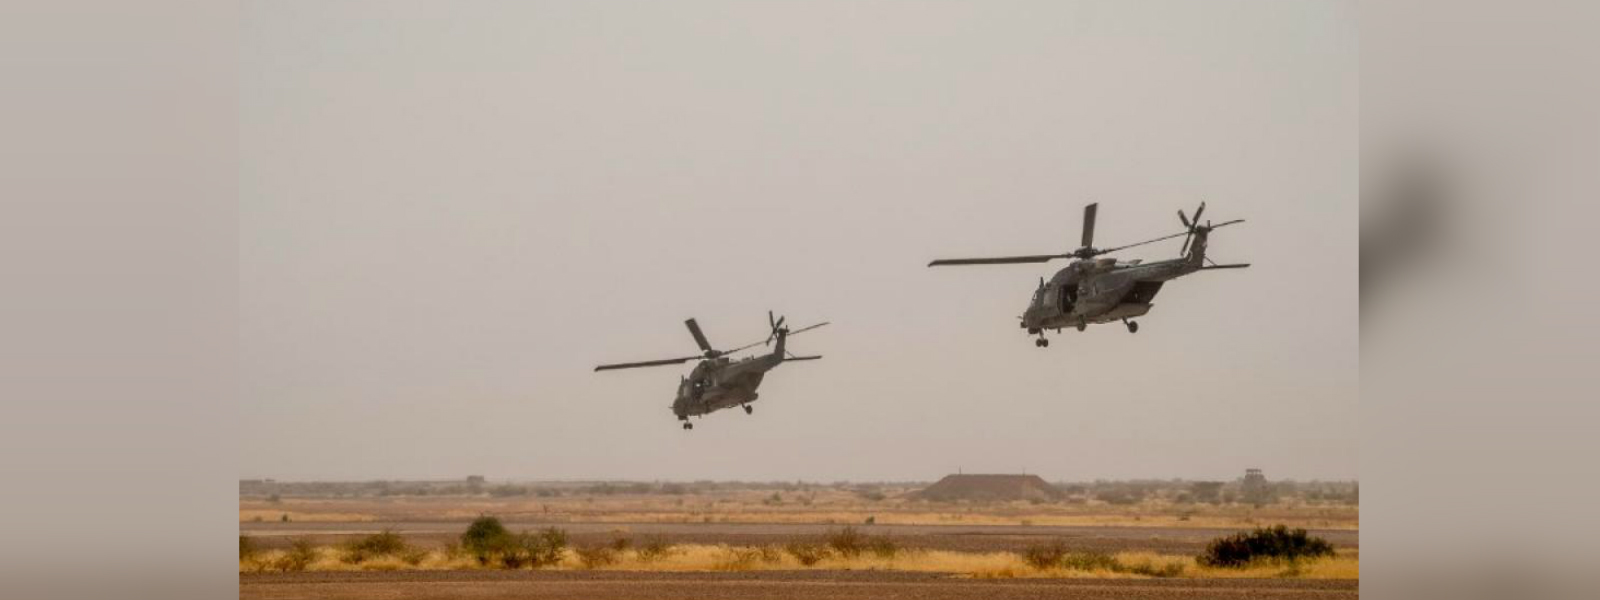 13 French troops killed in helicopter crash in Mali